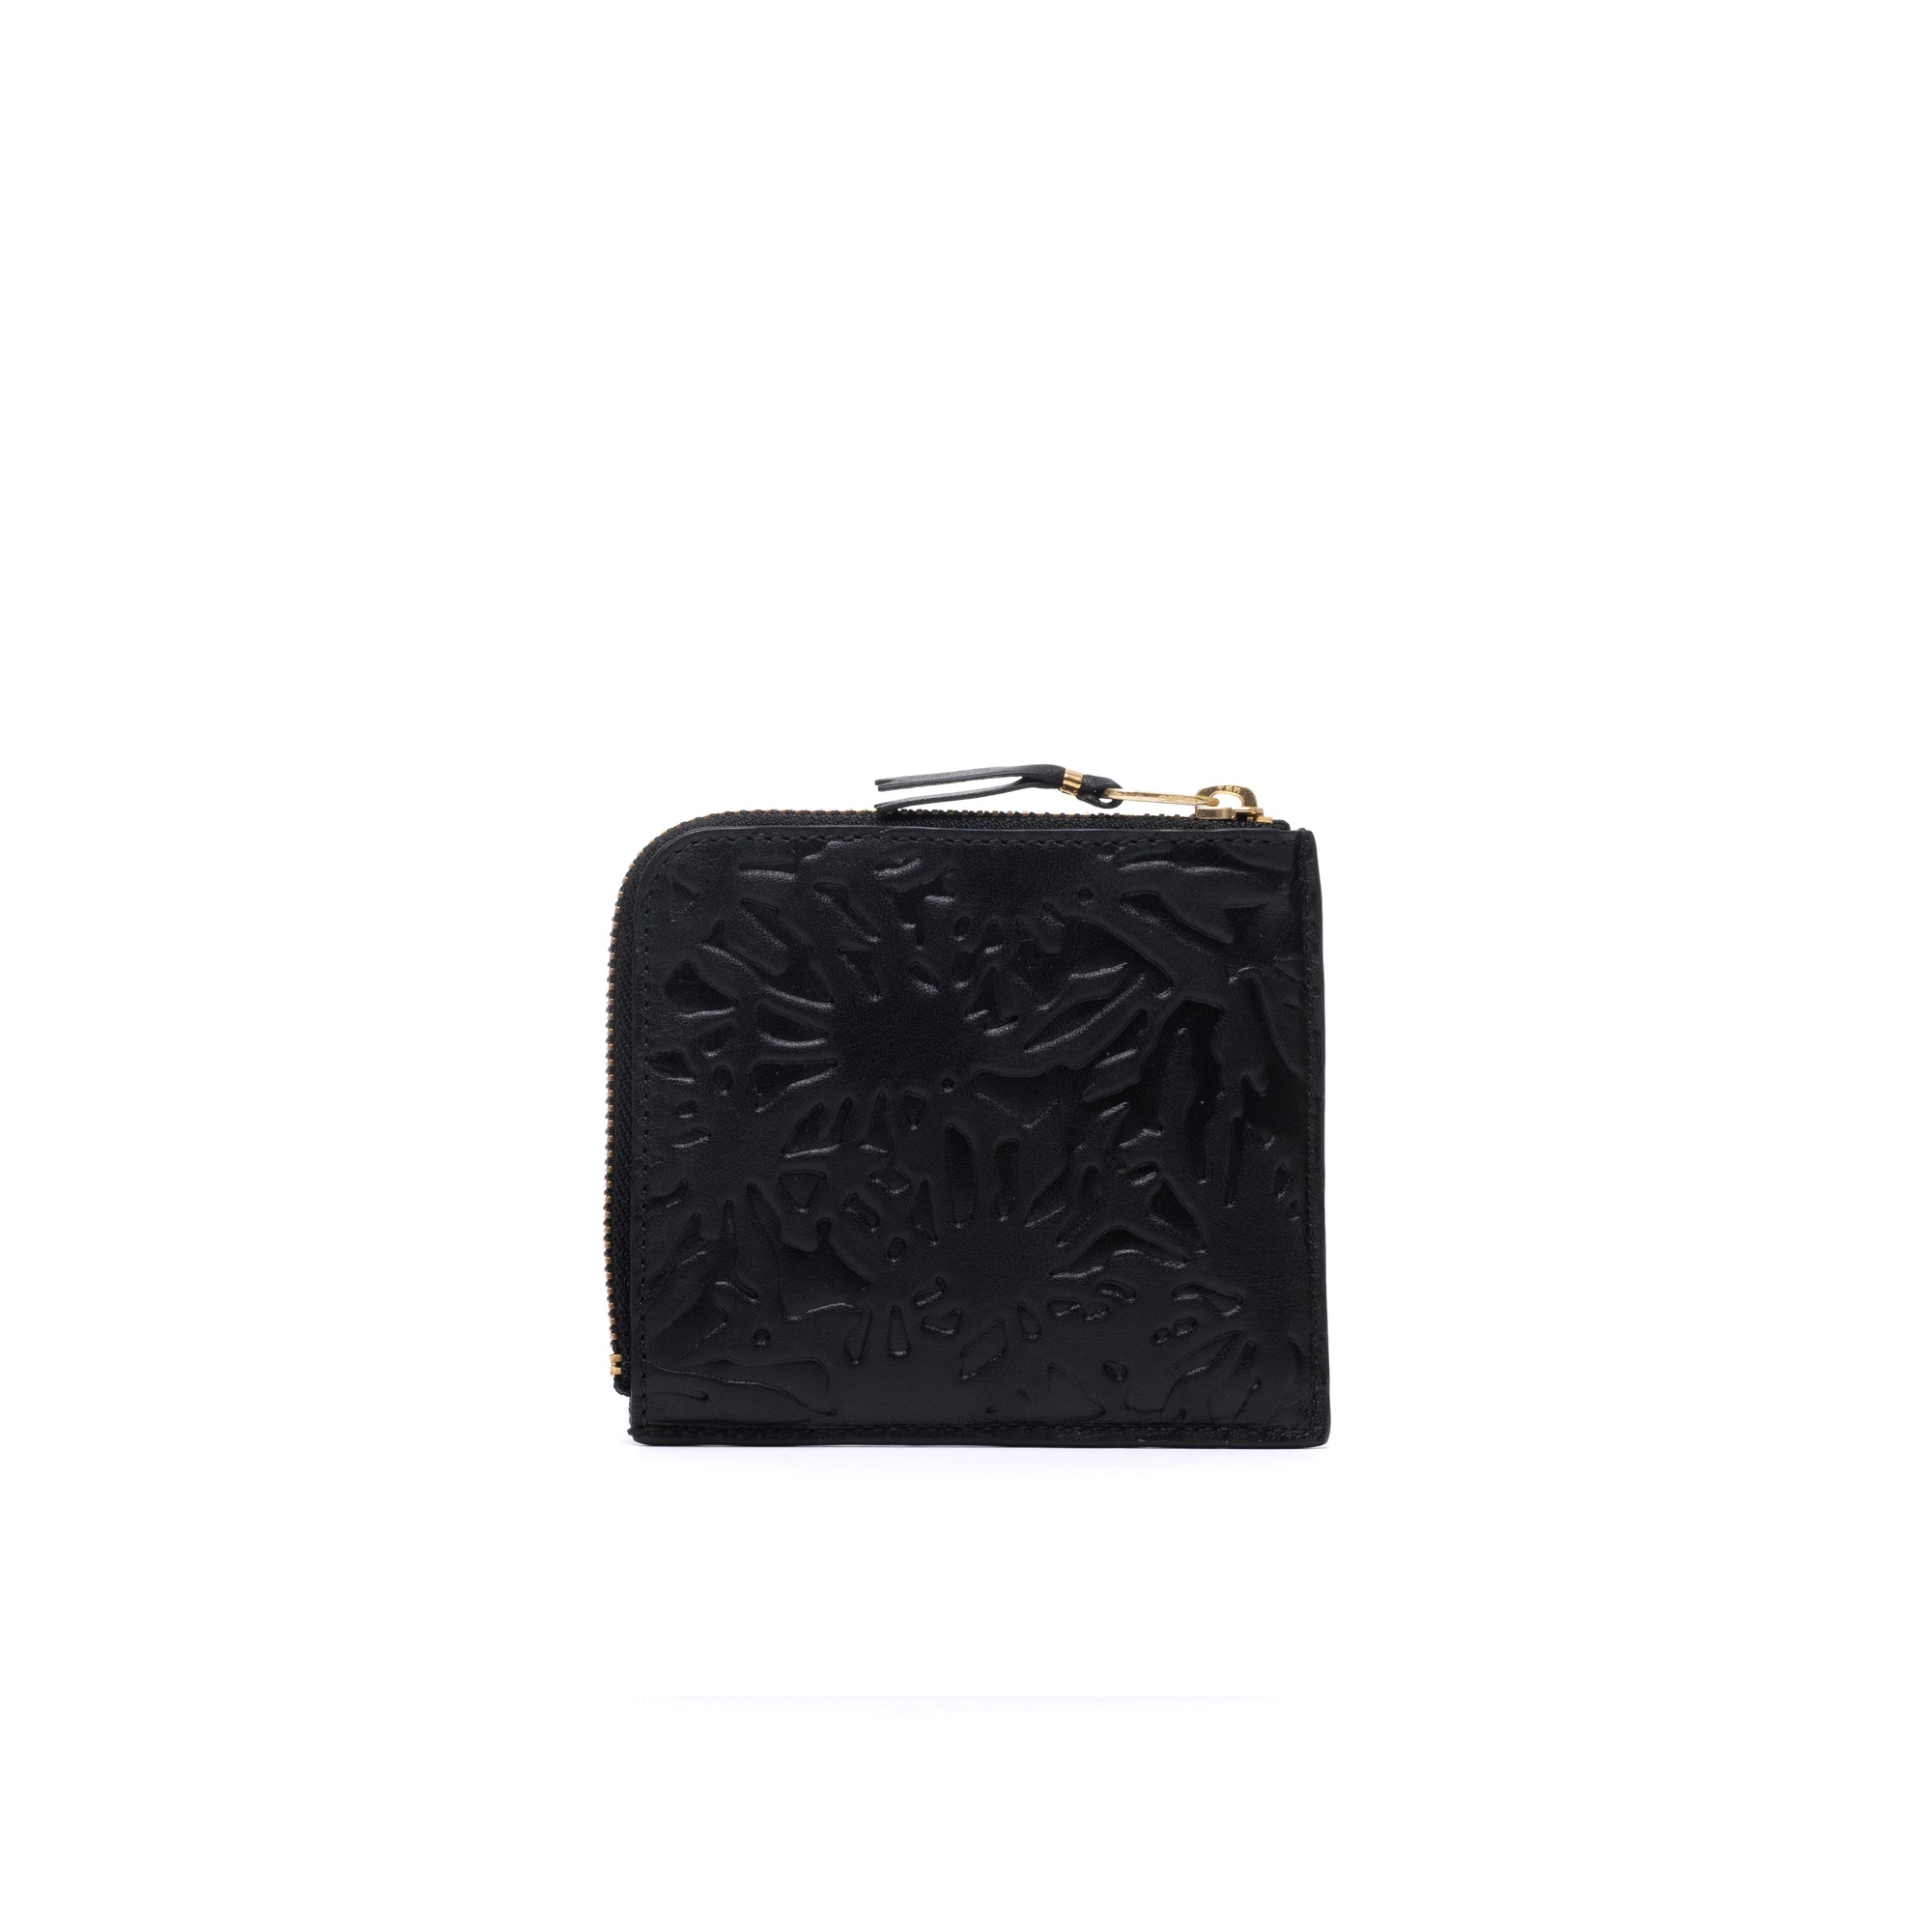 CDG WALLET - Embossed Forest - (SA3100EF Black) view 2